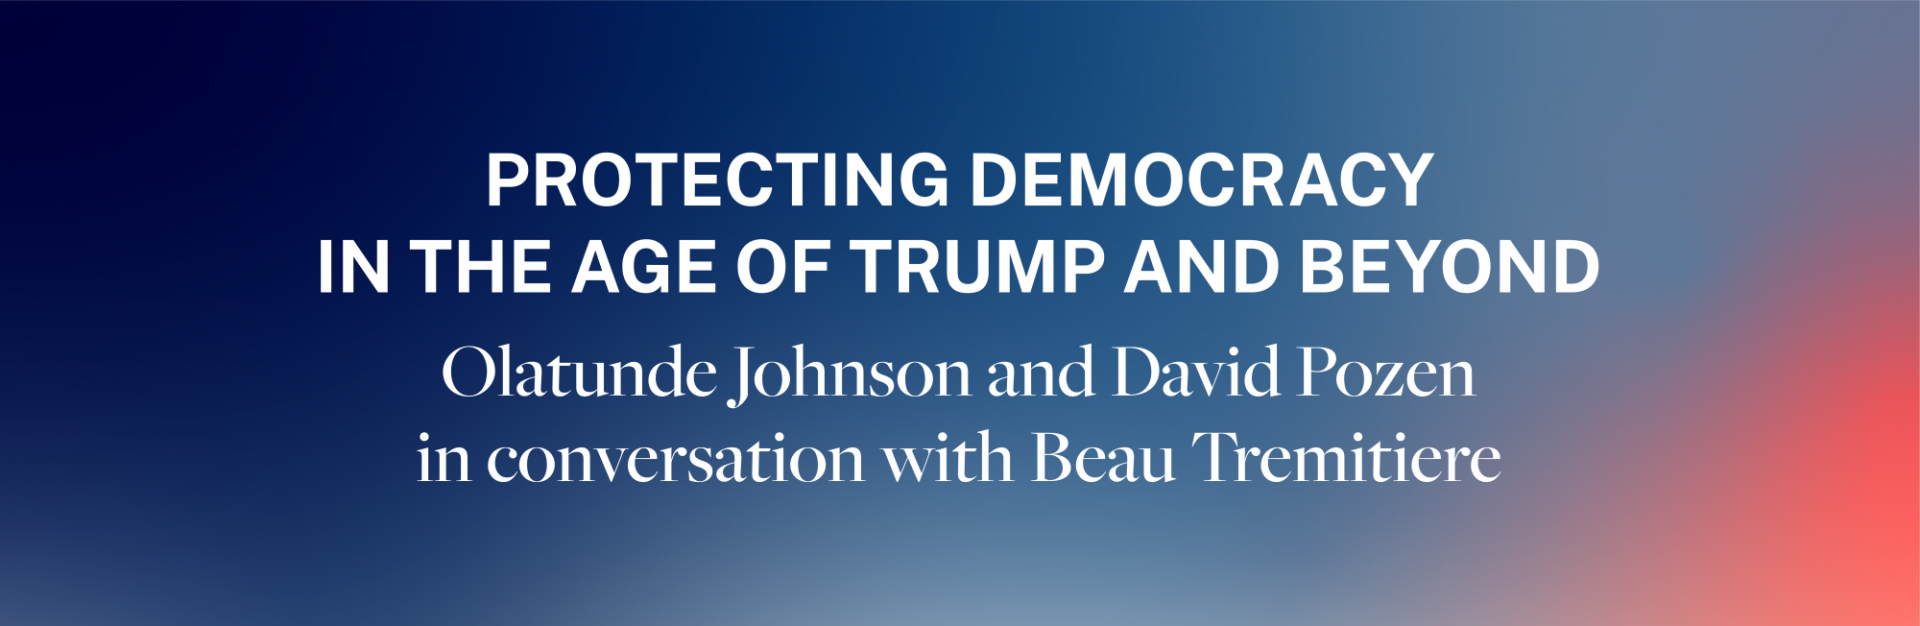 Protecting Democracy in the Age of Trump and Beyond